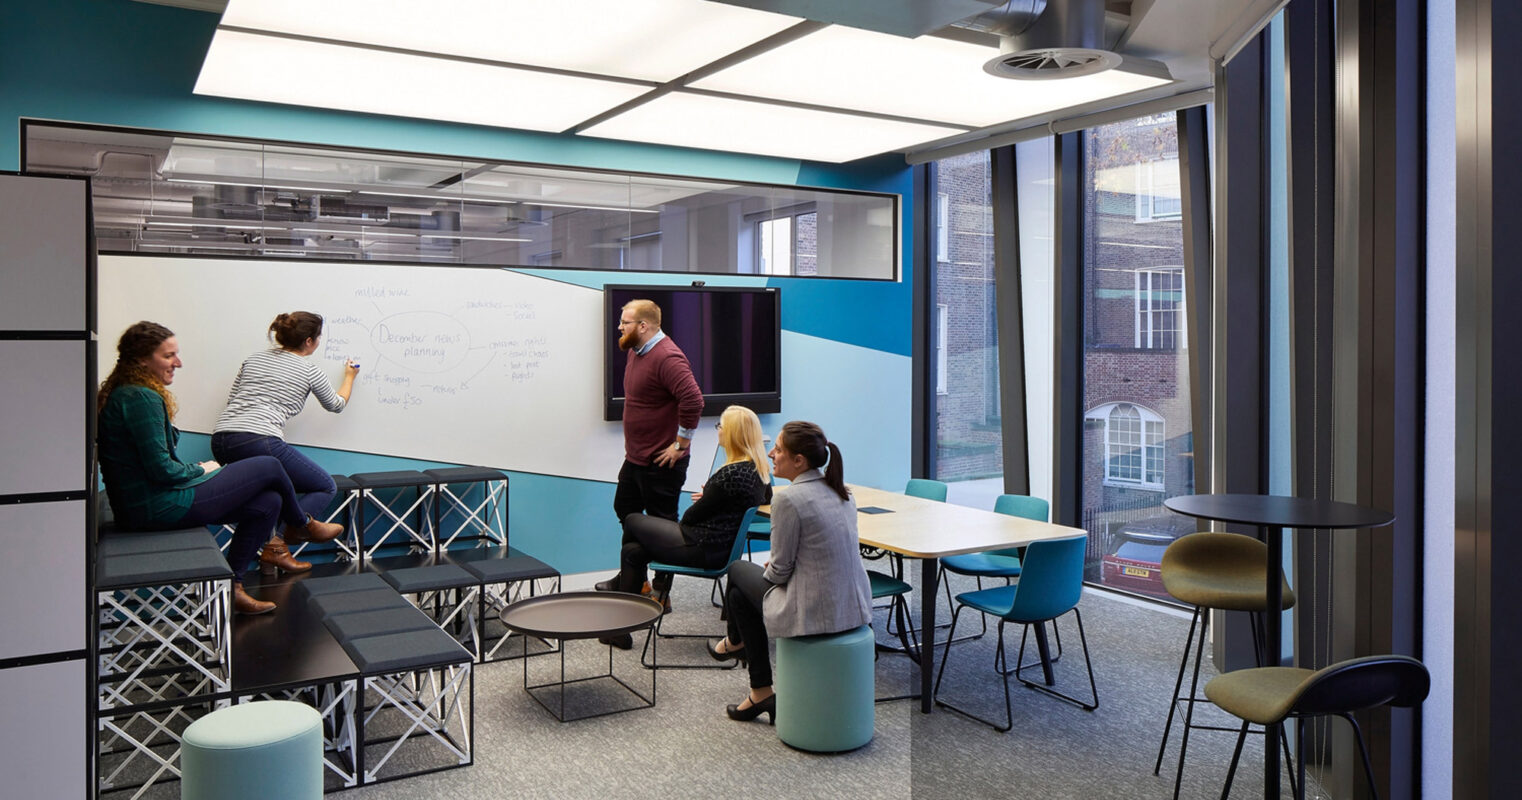 Modern office space featuring vibrant blue partitions, whiteboard for collaborative brainstorming, diverse seating options from poufs to ergonomic stools, and ample natural light complementing artificial task lighting. The design fosters a dynamic and interactive work environment.